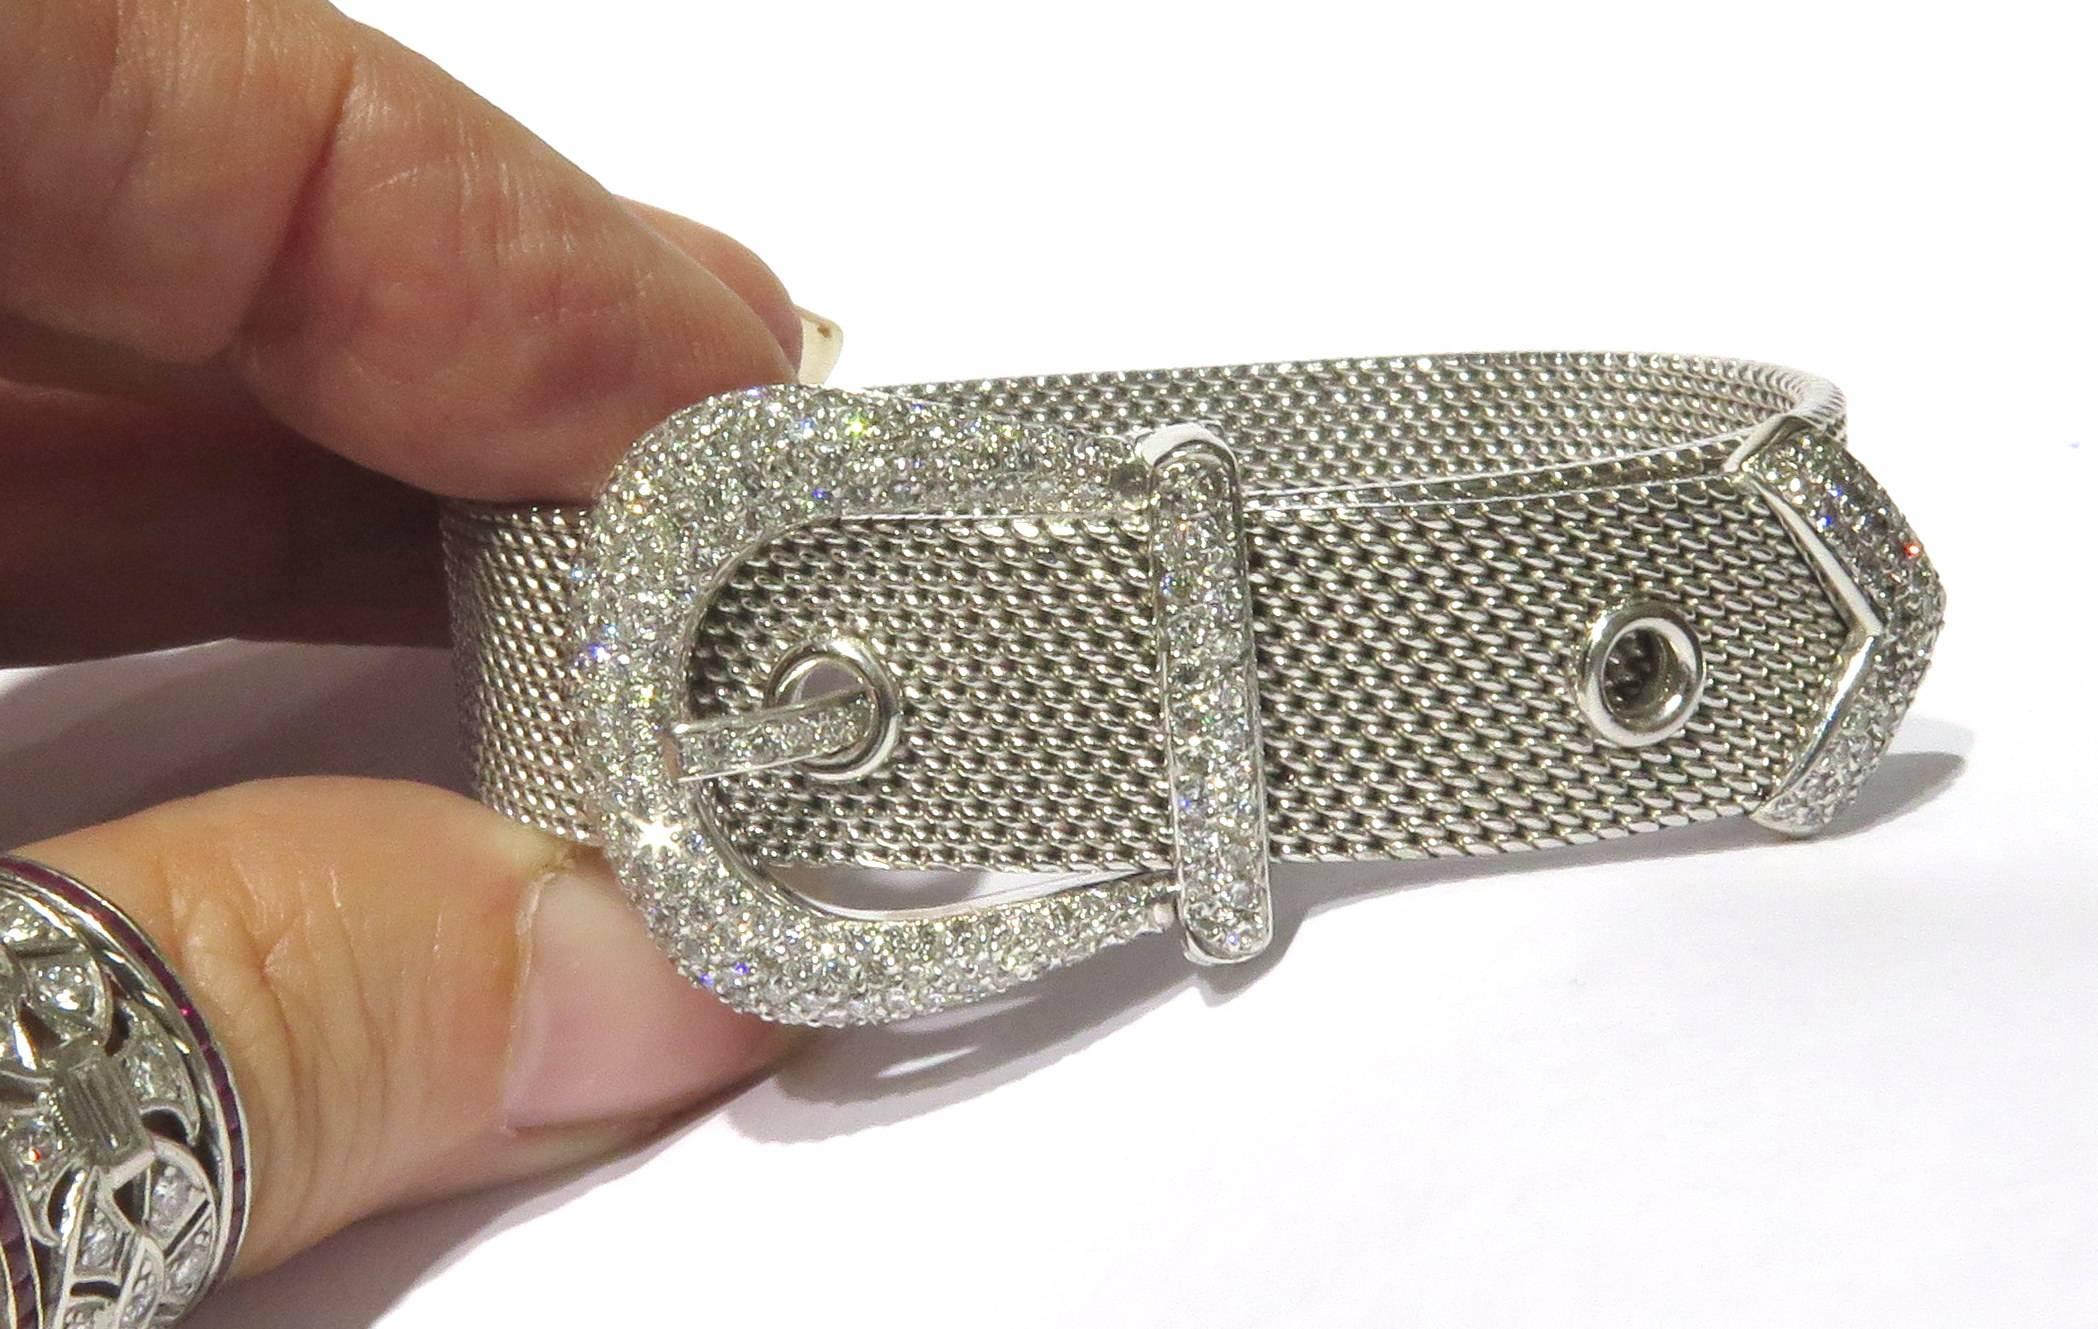 This adjustable diamond 18k white gold bracelet should be a staple in your collection. It is very comfortable and chic at the same time. Circa 1950's.
This bracelet is 9 inch long  by 1/2 inch wide.
The diamond buckle measures 1 1/8 inch wide.
This